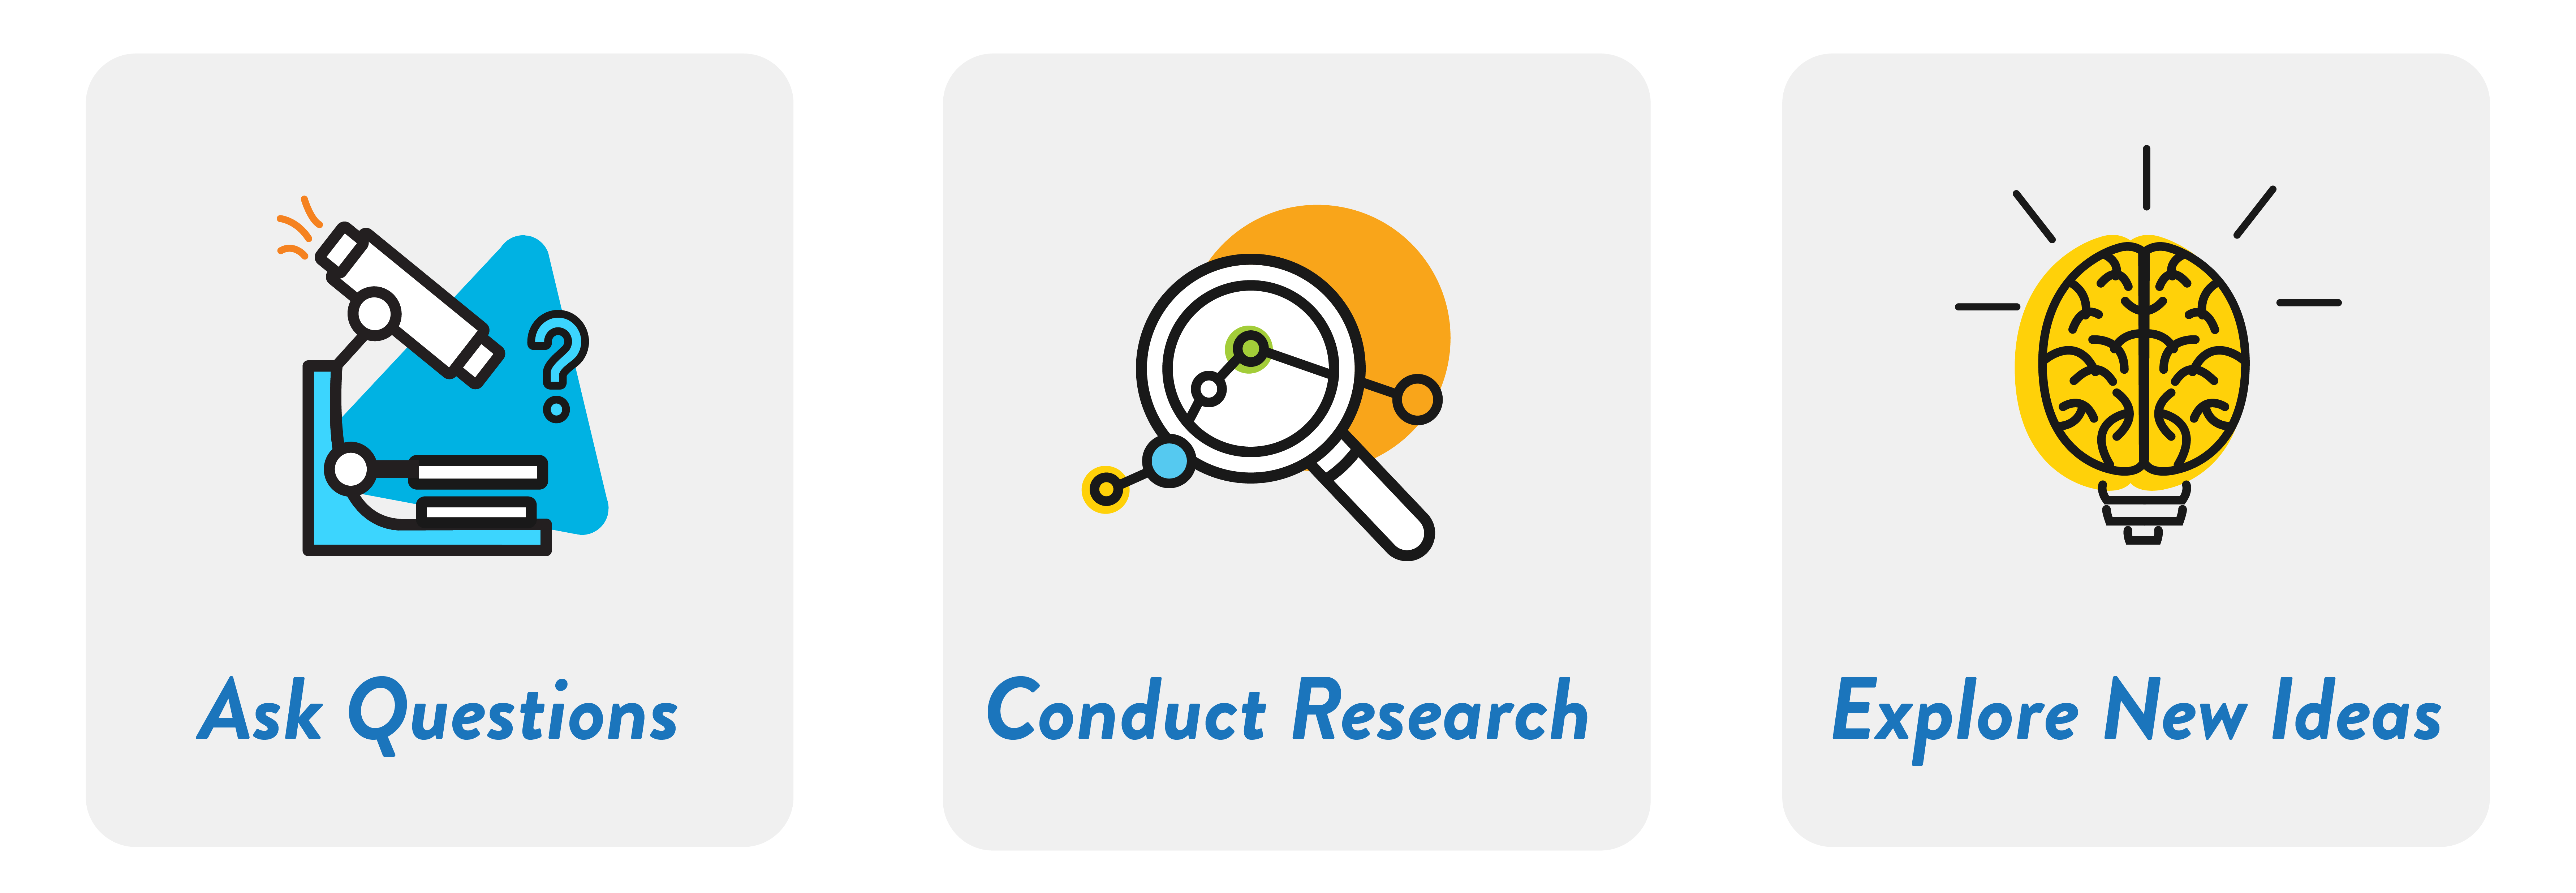 Ask Questions. Conduct Research. Explore New Ideas.